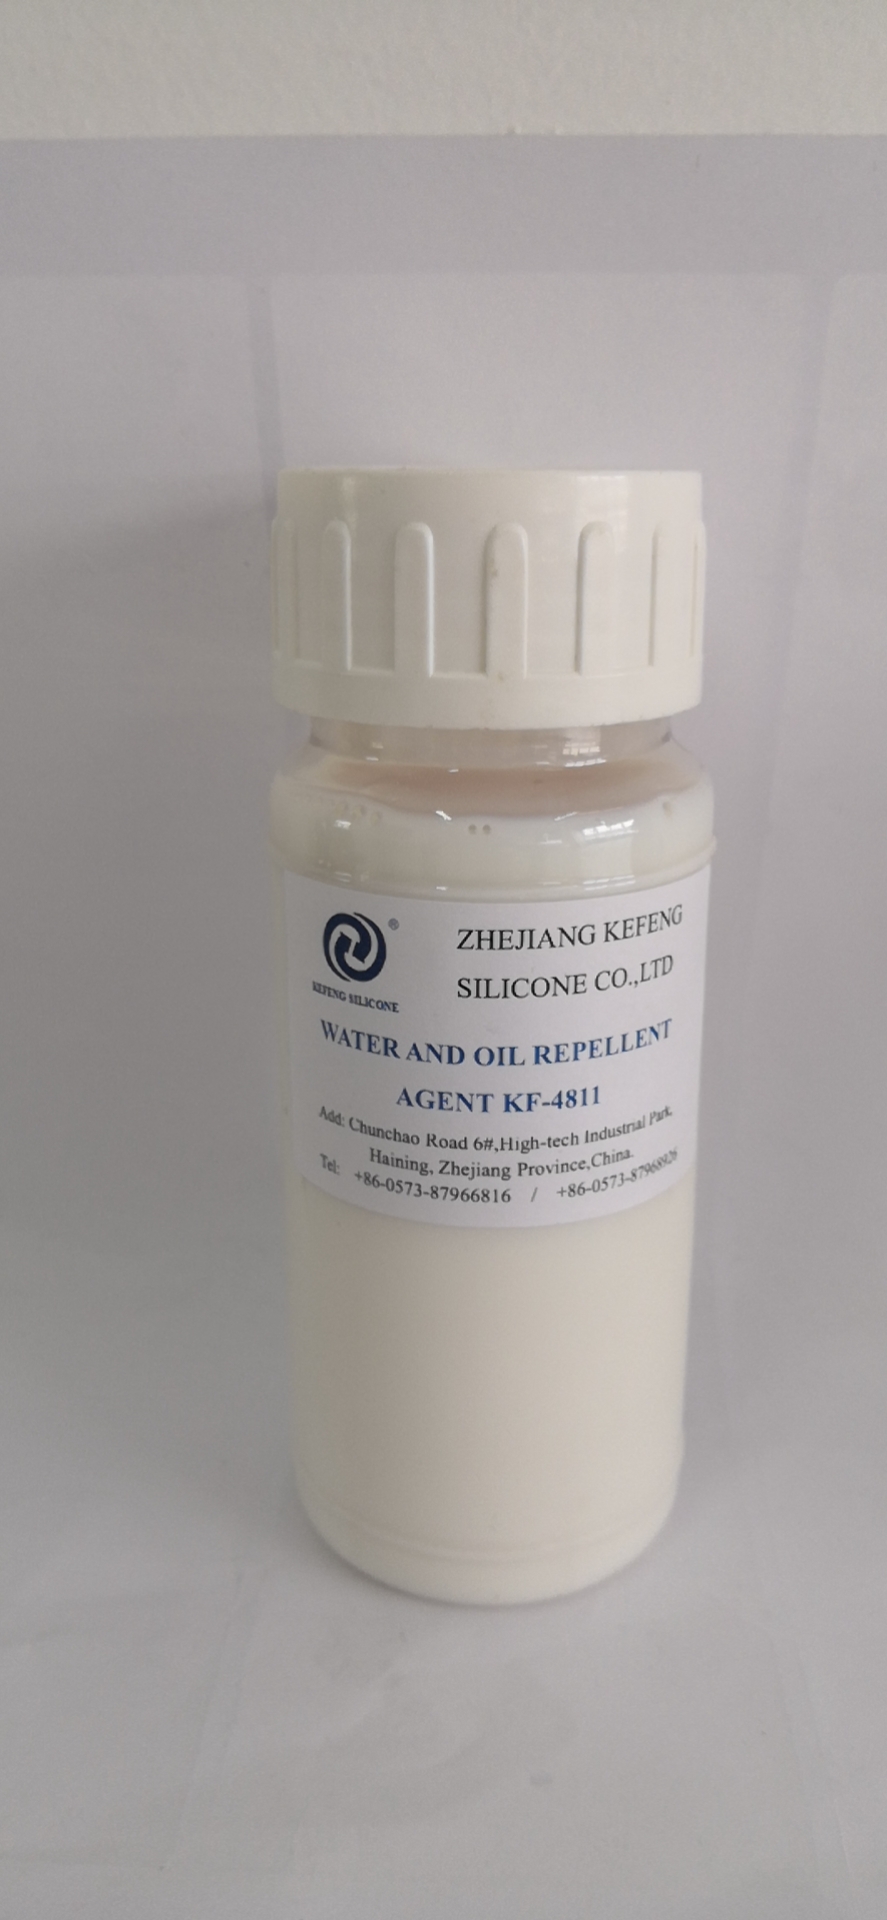 Silicone Oil Is a Natural Alternative For Lubricants and Sealants